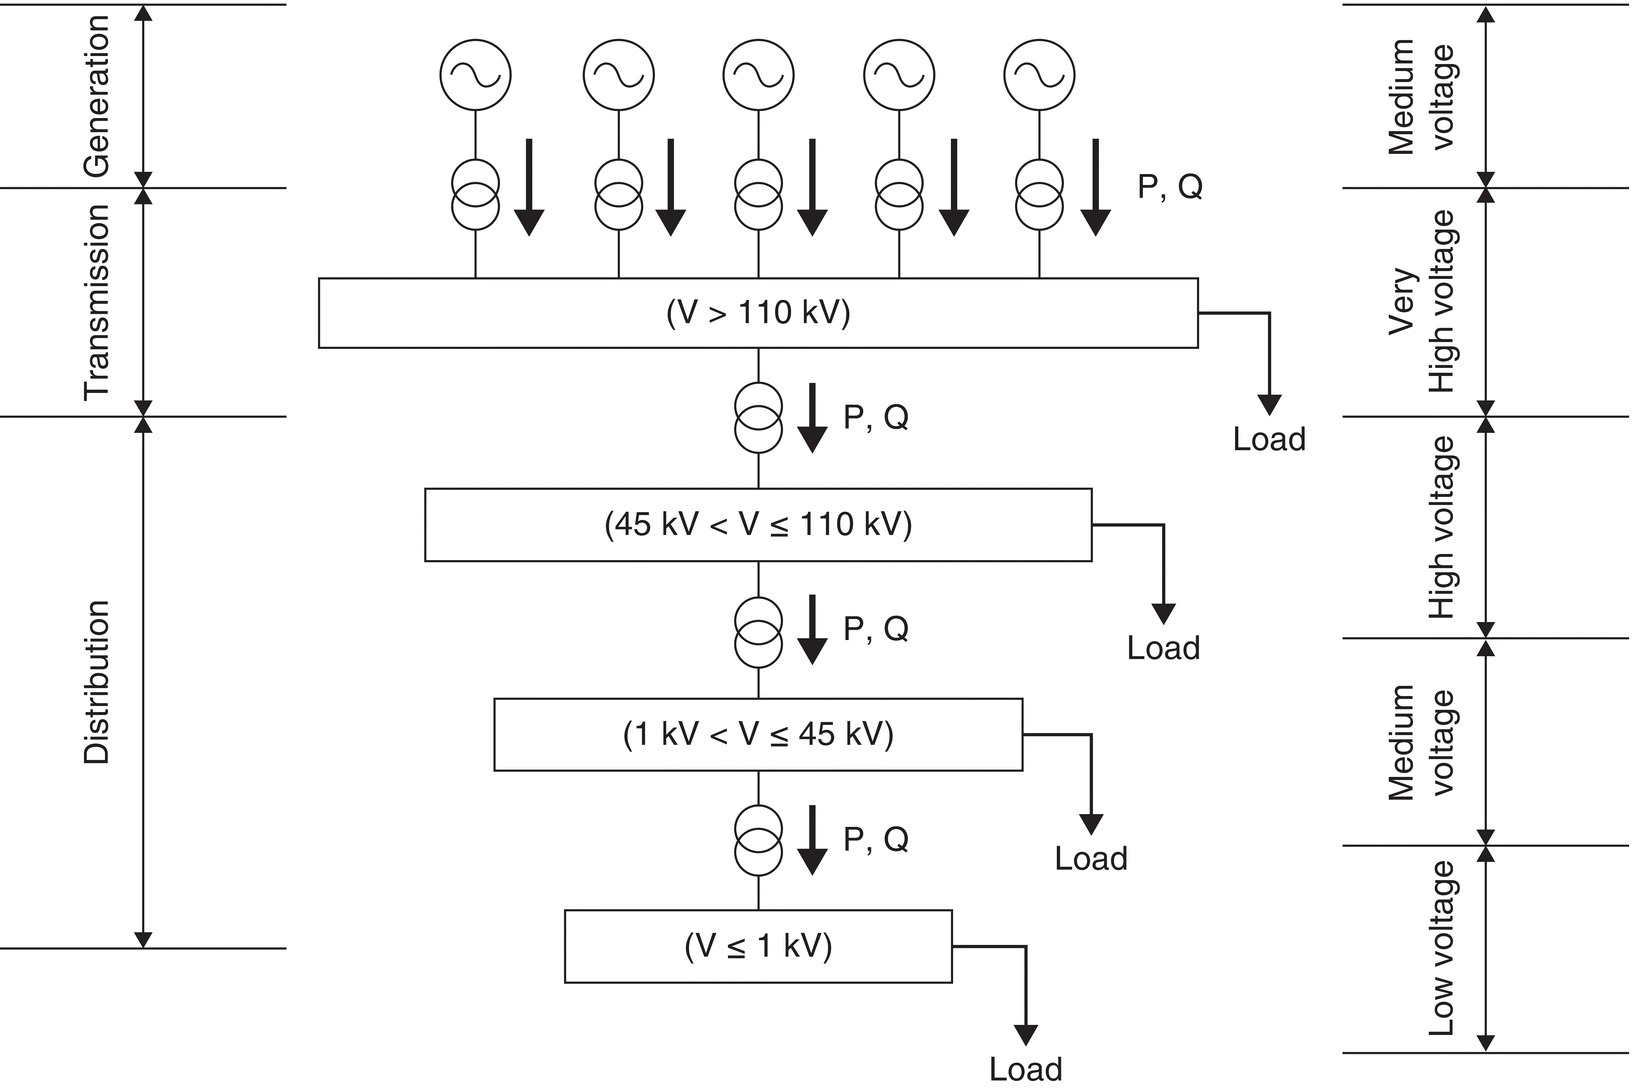 Schematic illustrating the organization of conventional electric power system, with two-headed arrows labeled distribution, transmission, generation, medium voltage, low voltage, etc. at the left and right sides.